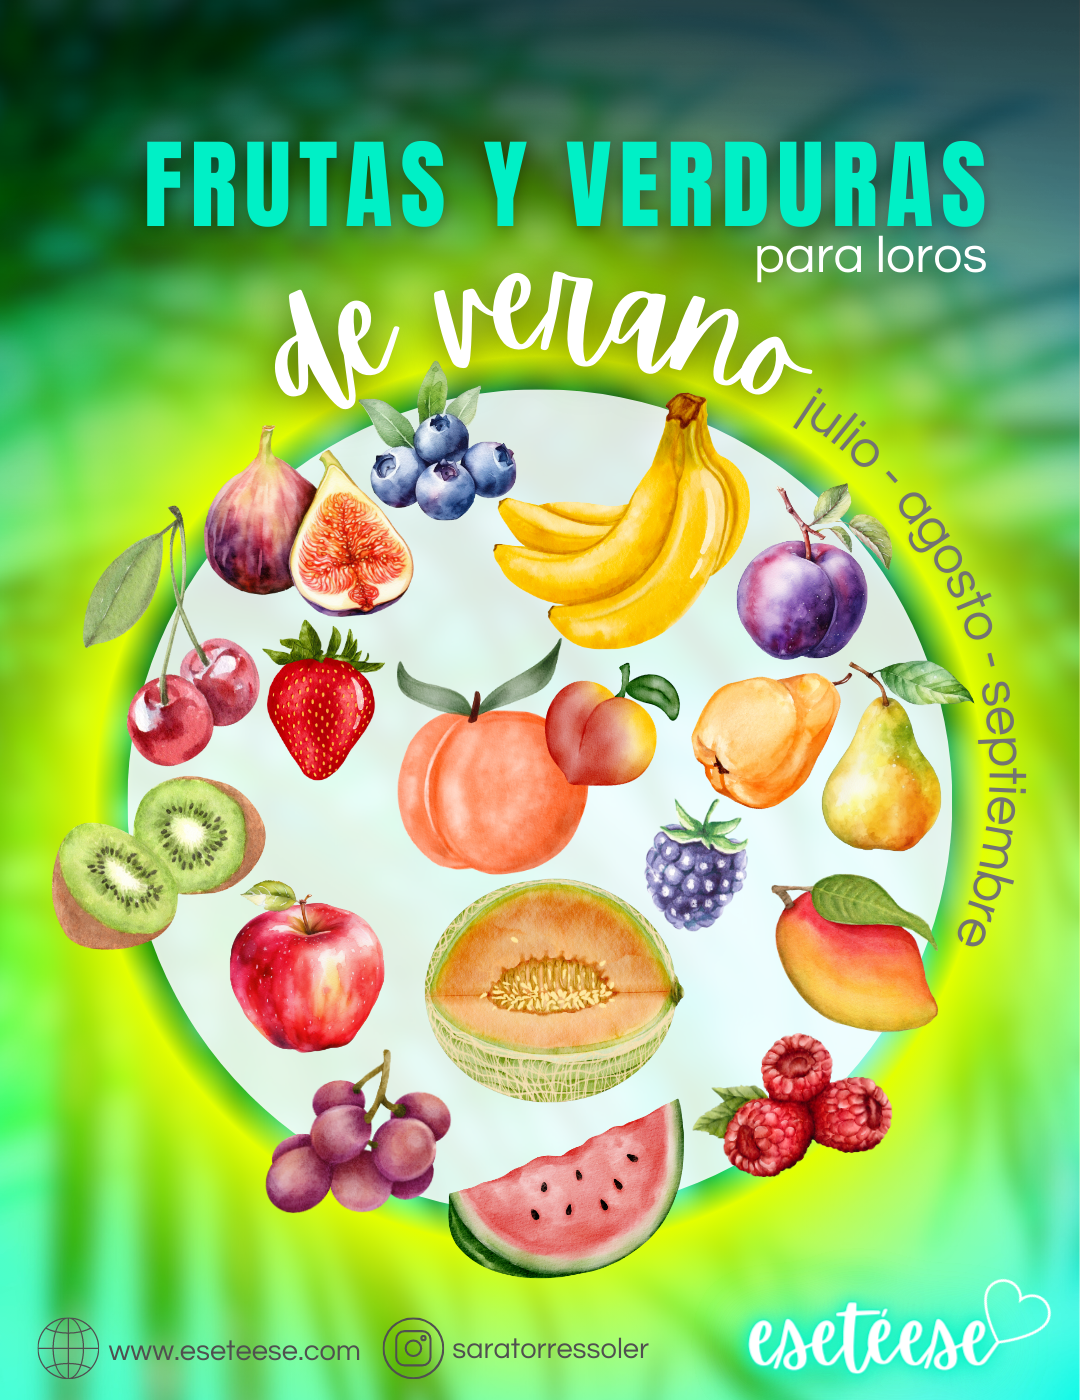 FRUITS AND VEGETABLES for parrots, SUMMER season